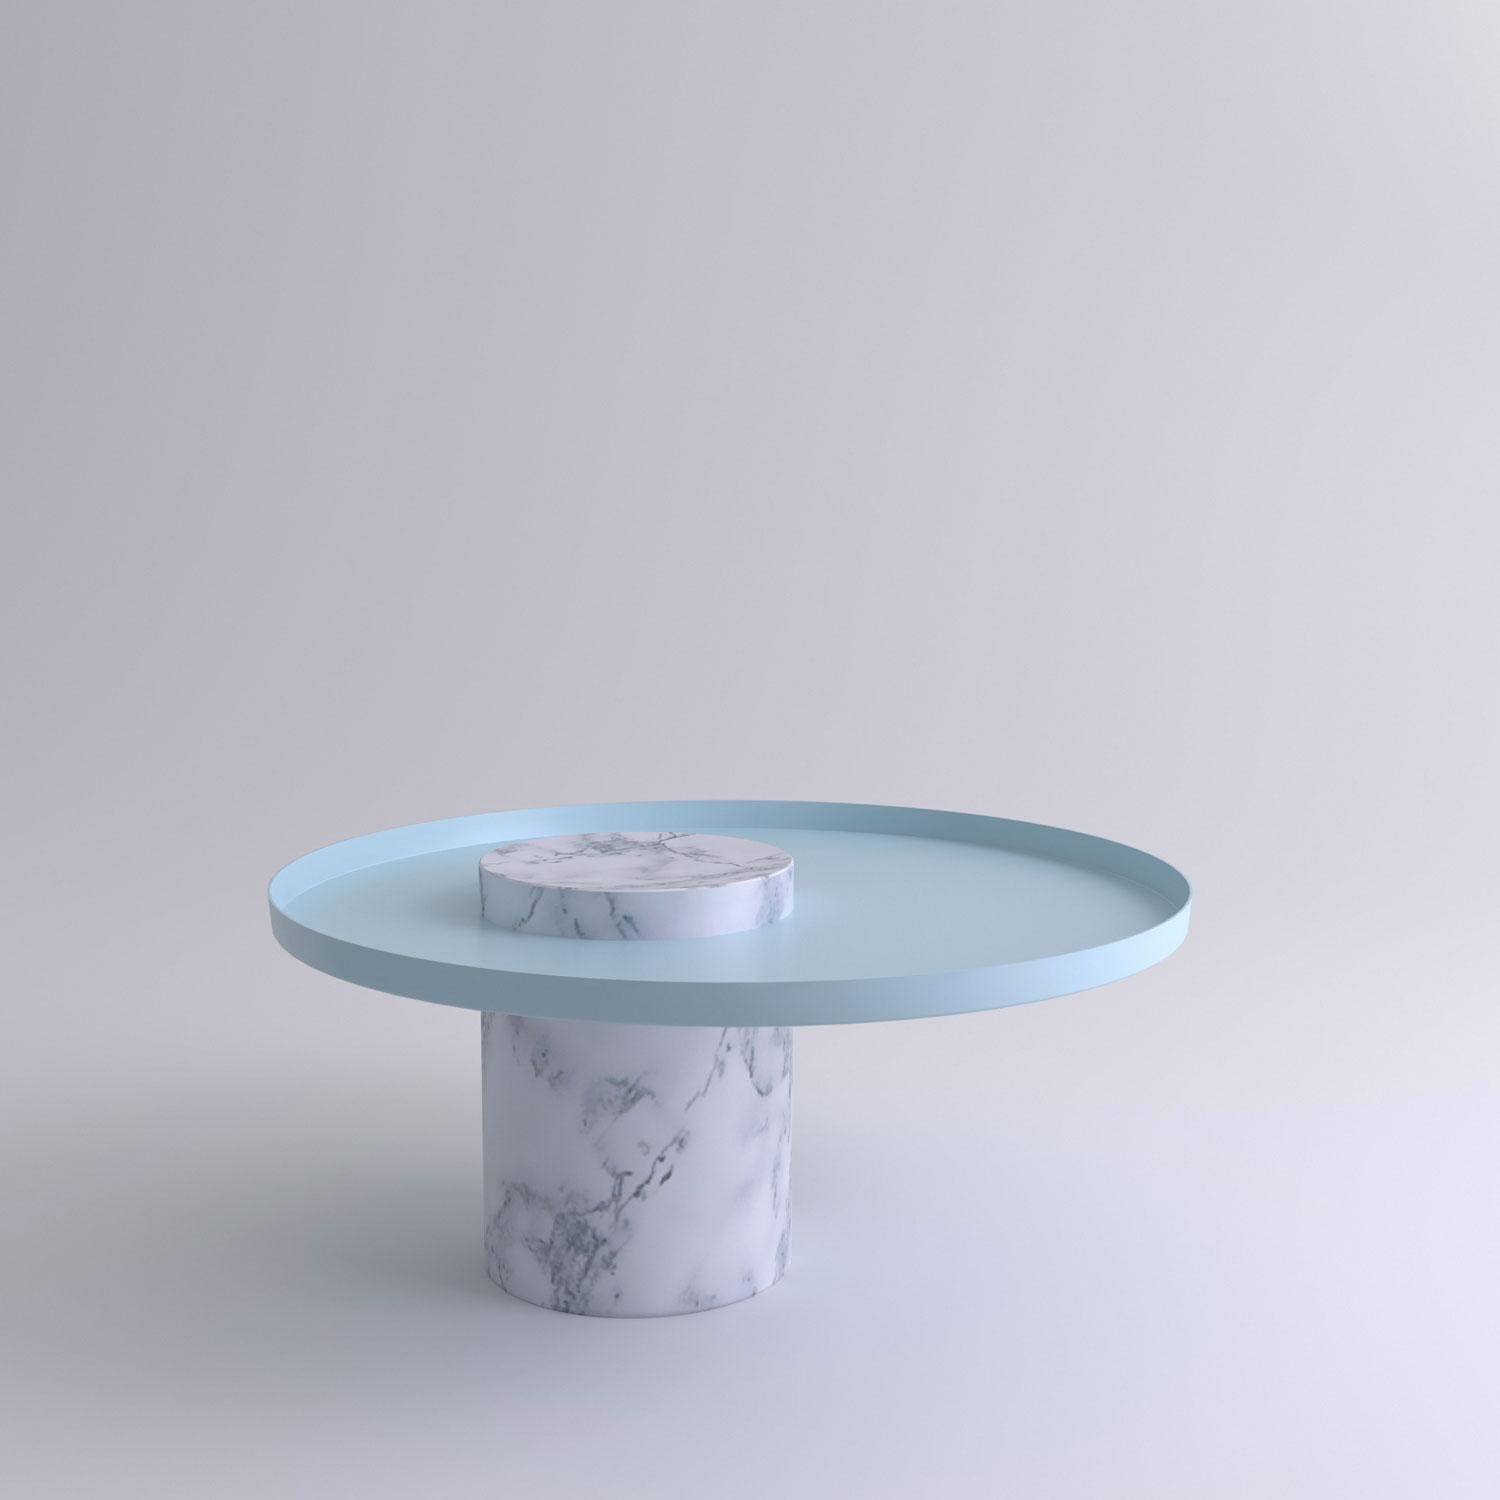 Low white marble contemporary guéridon, Sebastian Herkner
Dimensions: D 70 x H 33 cm
Materials: Pele de Tigre marble, light blue metal tray

The salute table exists in 3 sizes, 4 different marble stones for the column and 5 different finishes